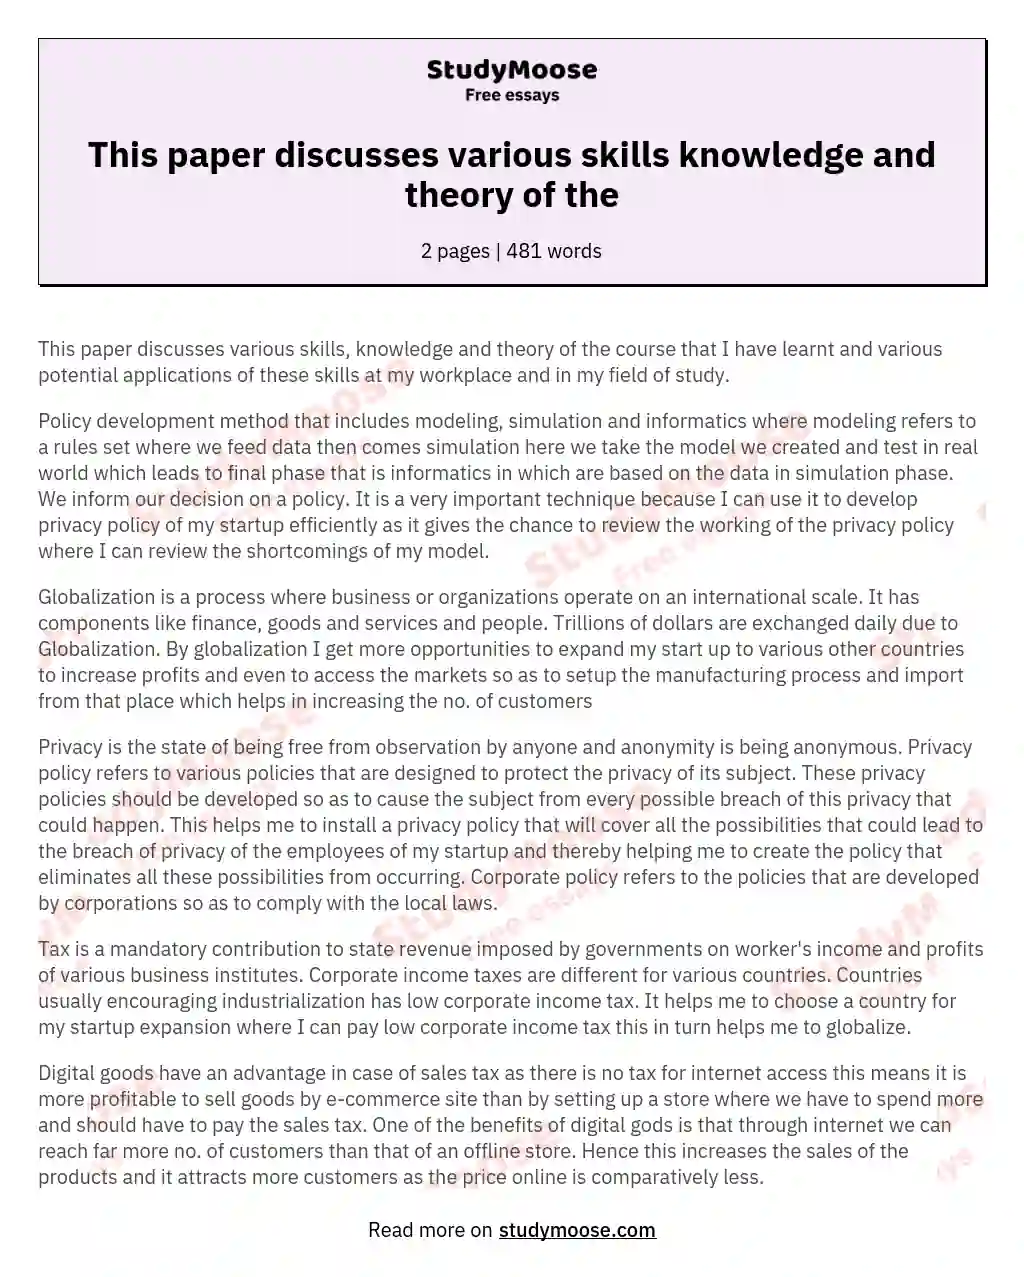 This paper discusses various skills knowledge and theory of the